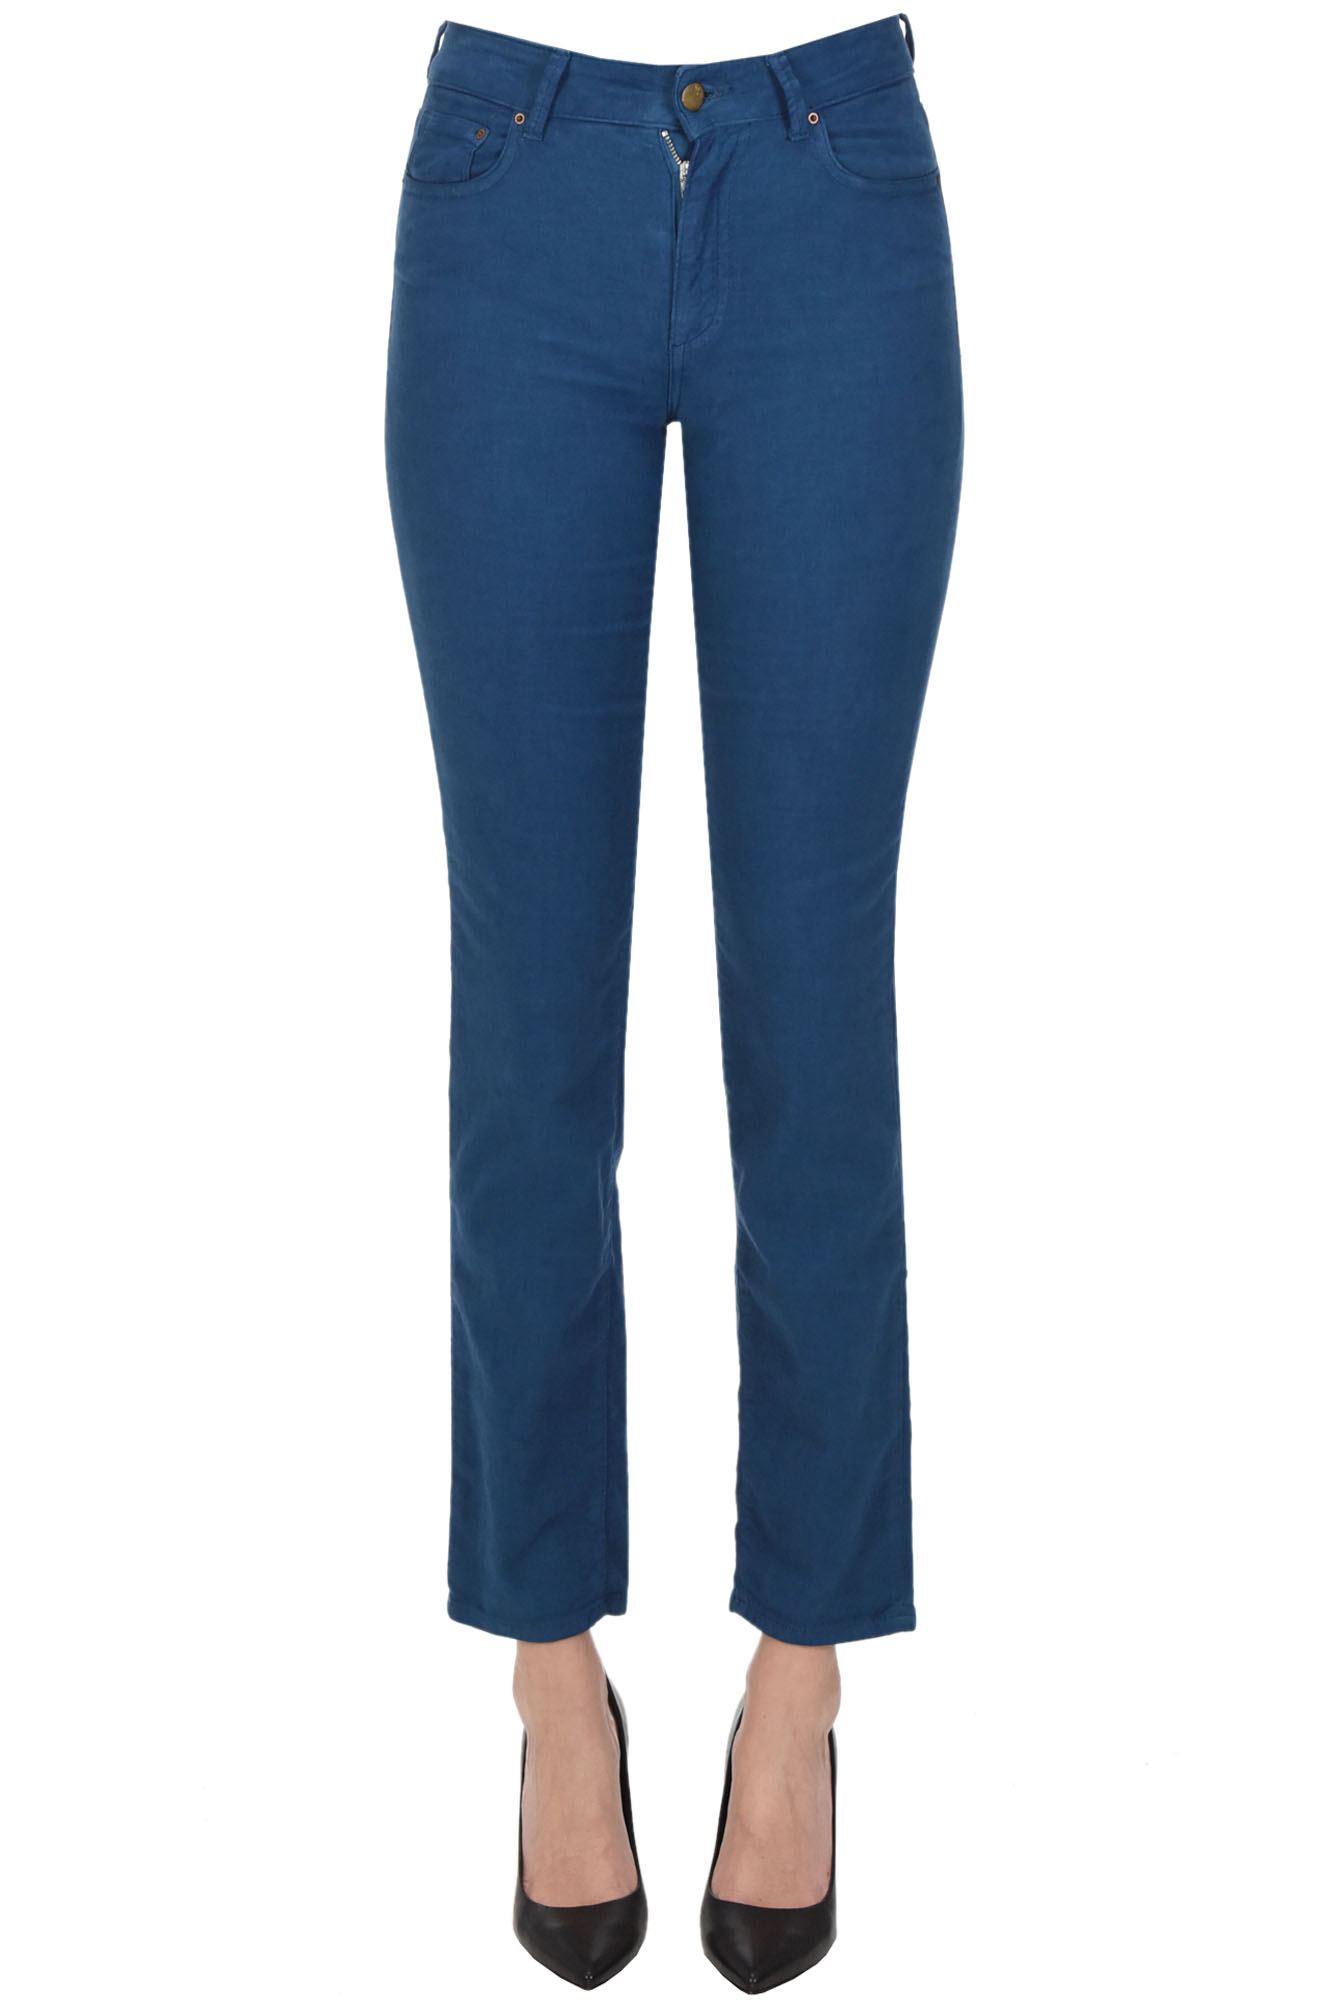 Ps. Don't Forget Me Velvet 5 Pockets Style Slim Trousers In Blue